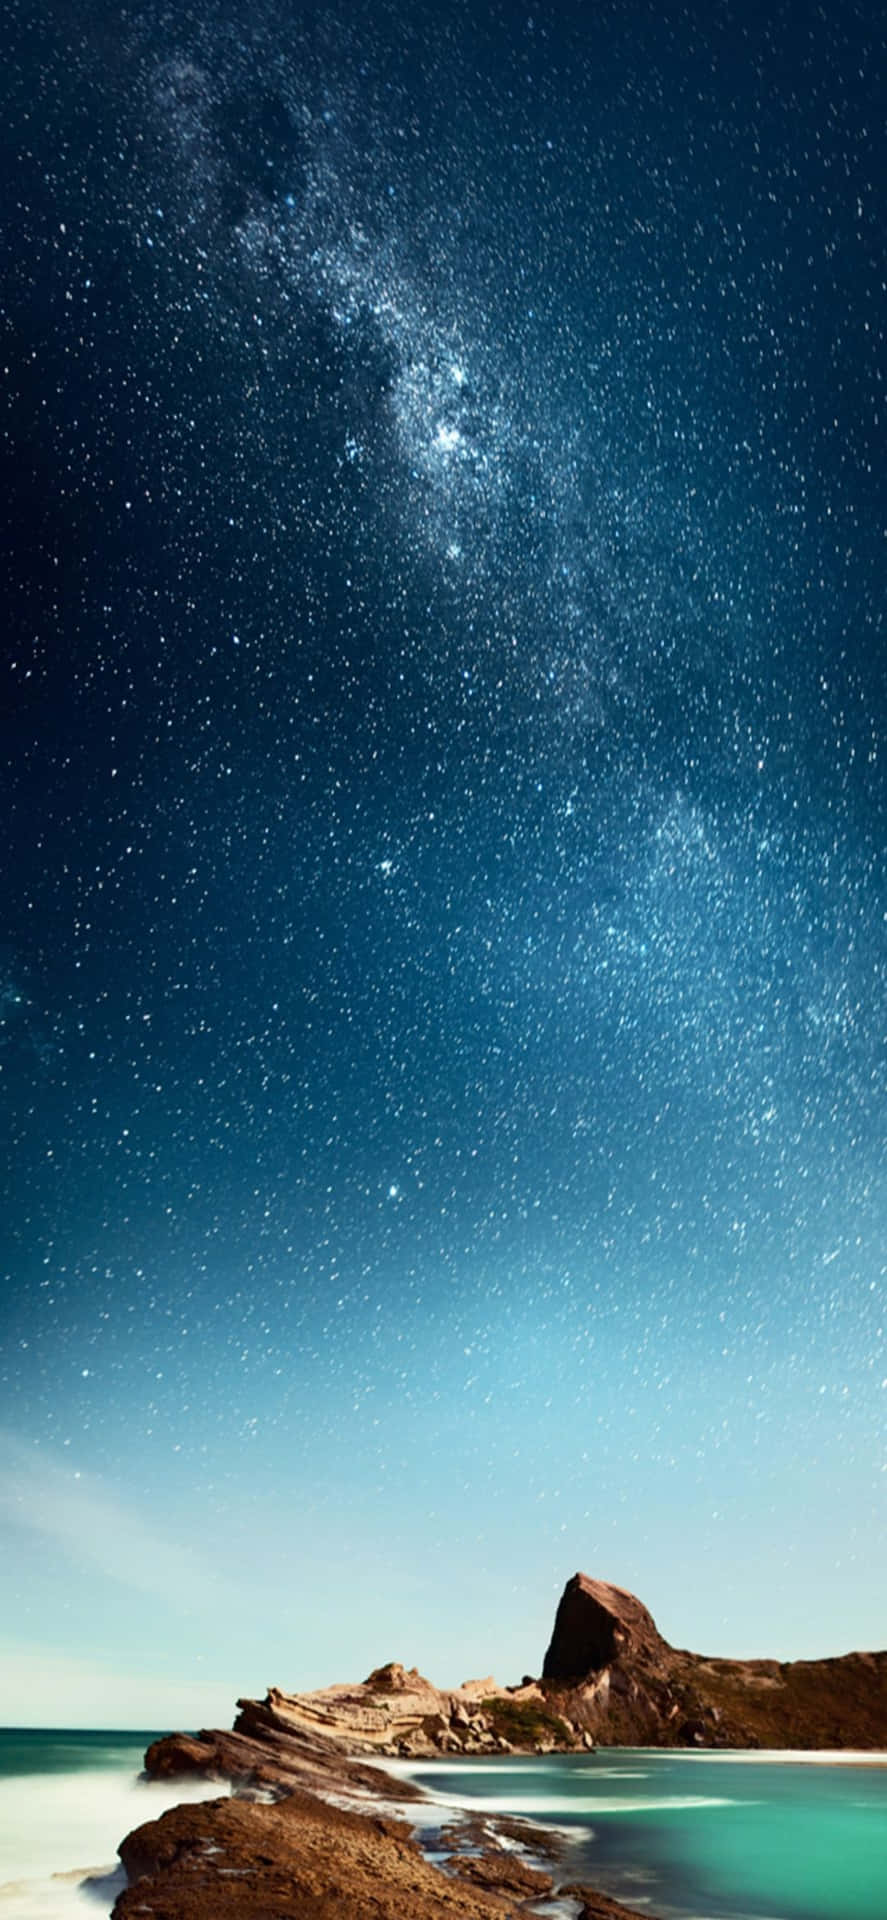 iPhone XS Beach And Milky Way Background